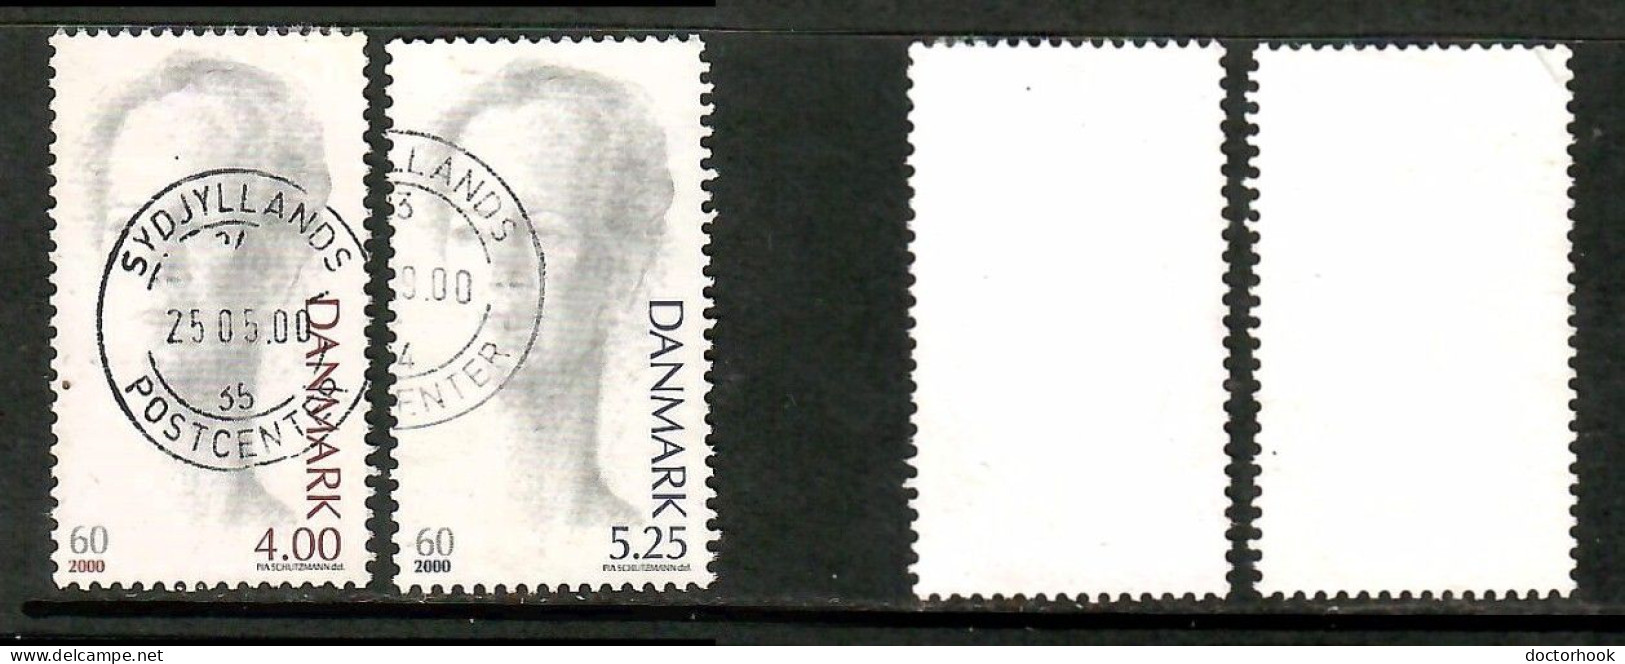 DENMARK   Scott # 1185-6 USED (CONDITION PER SCAN) (Stamp Scan # 1025-1) - Used Stamps